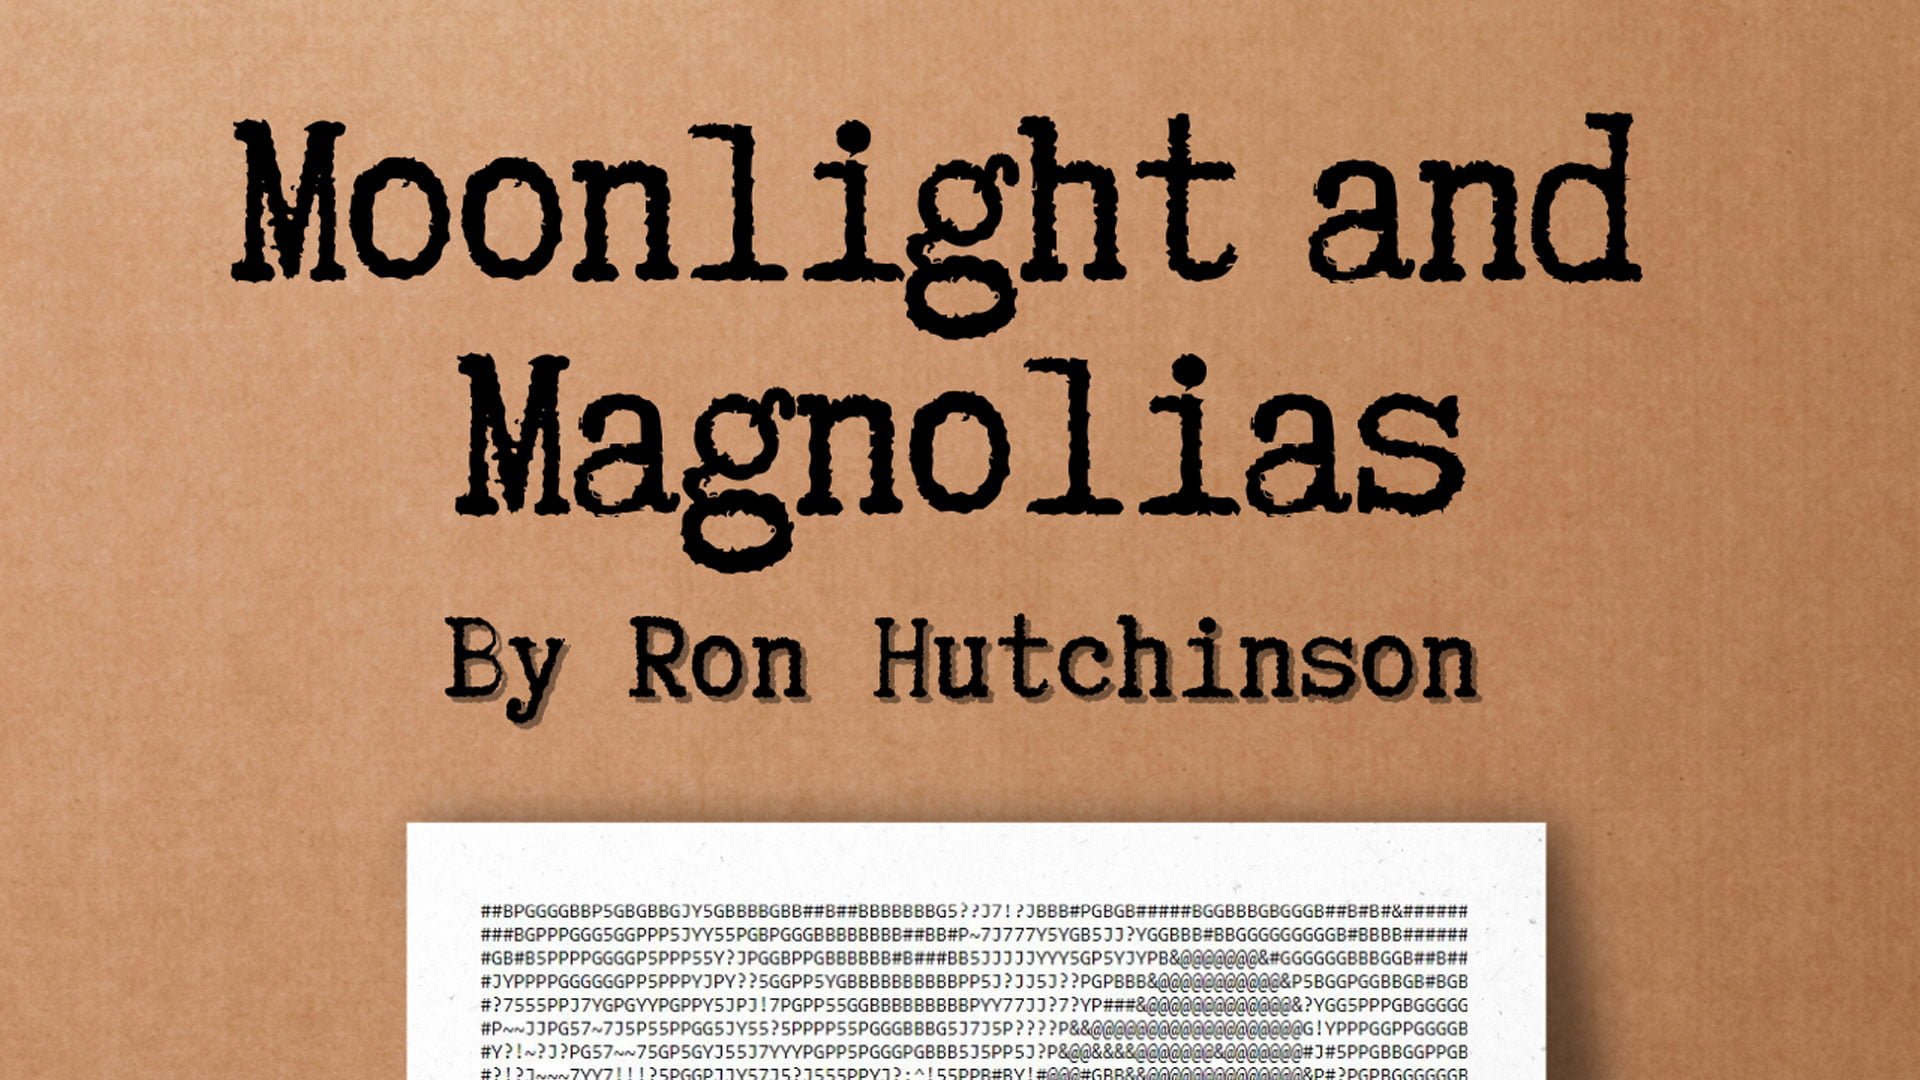 Moonlight and Magnolias By Ron Hutchinson